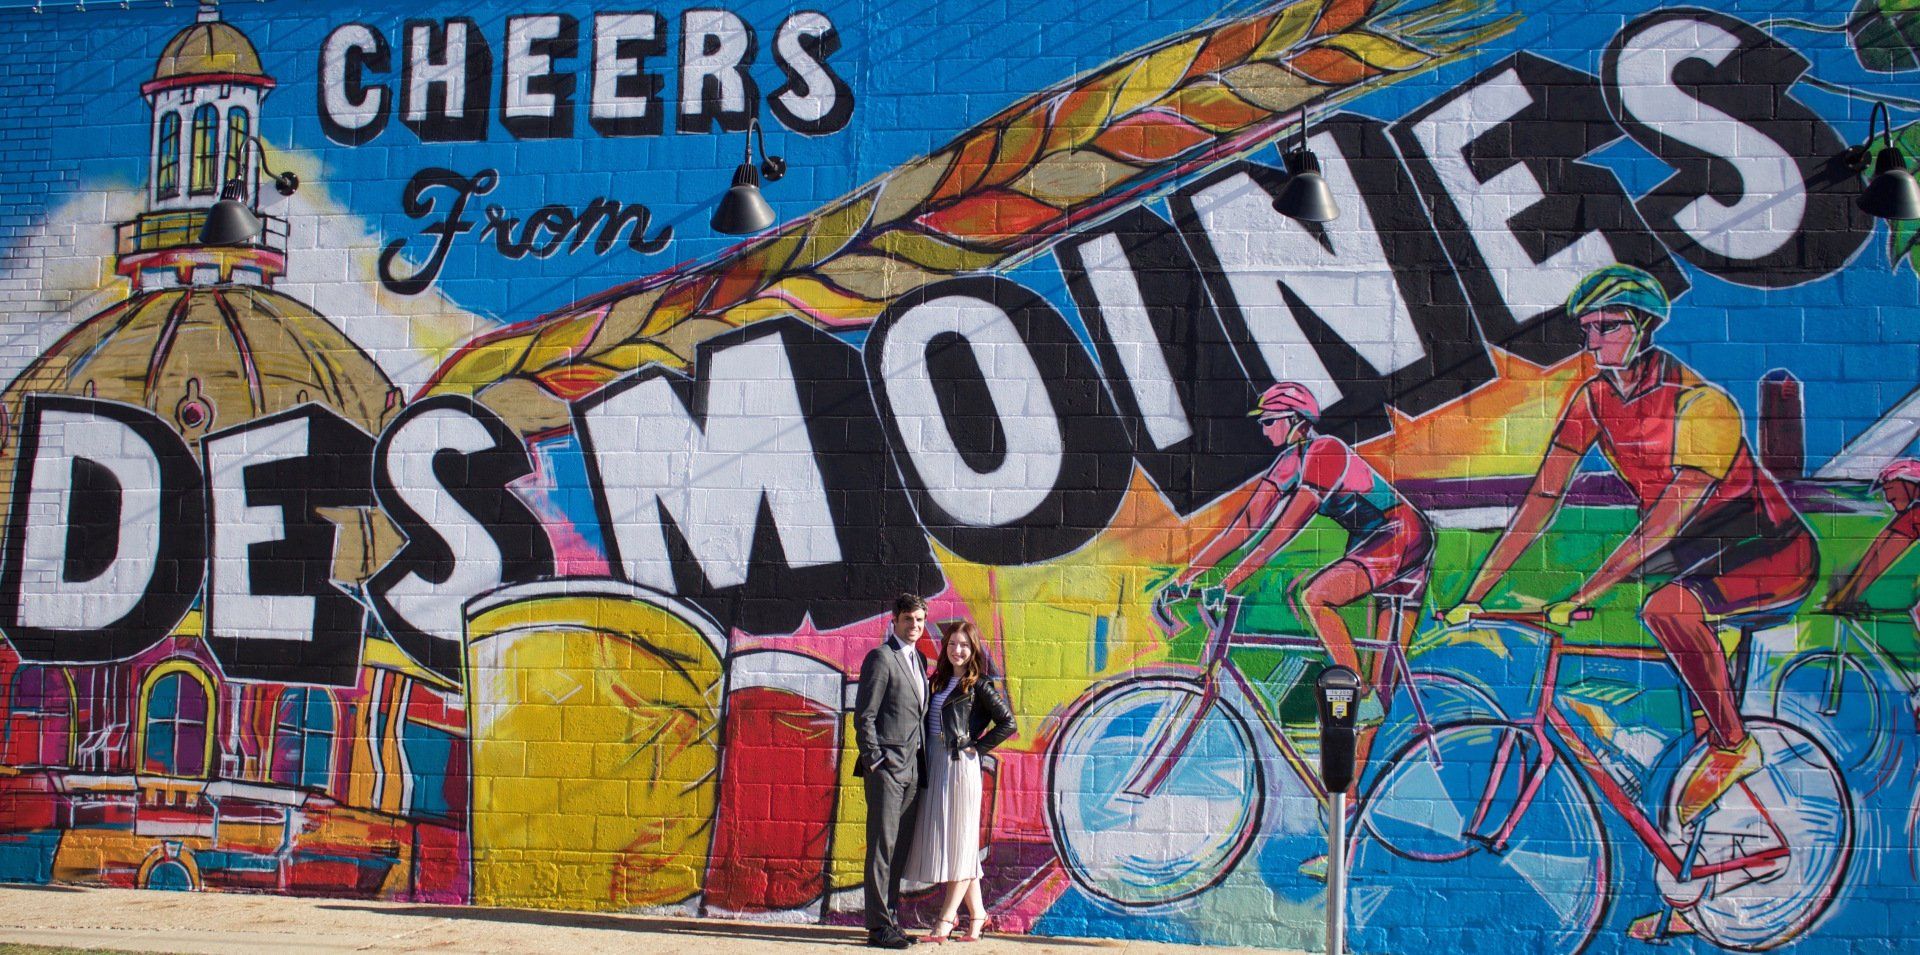 Cheers From Des Moines mural